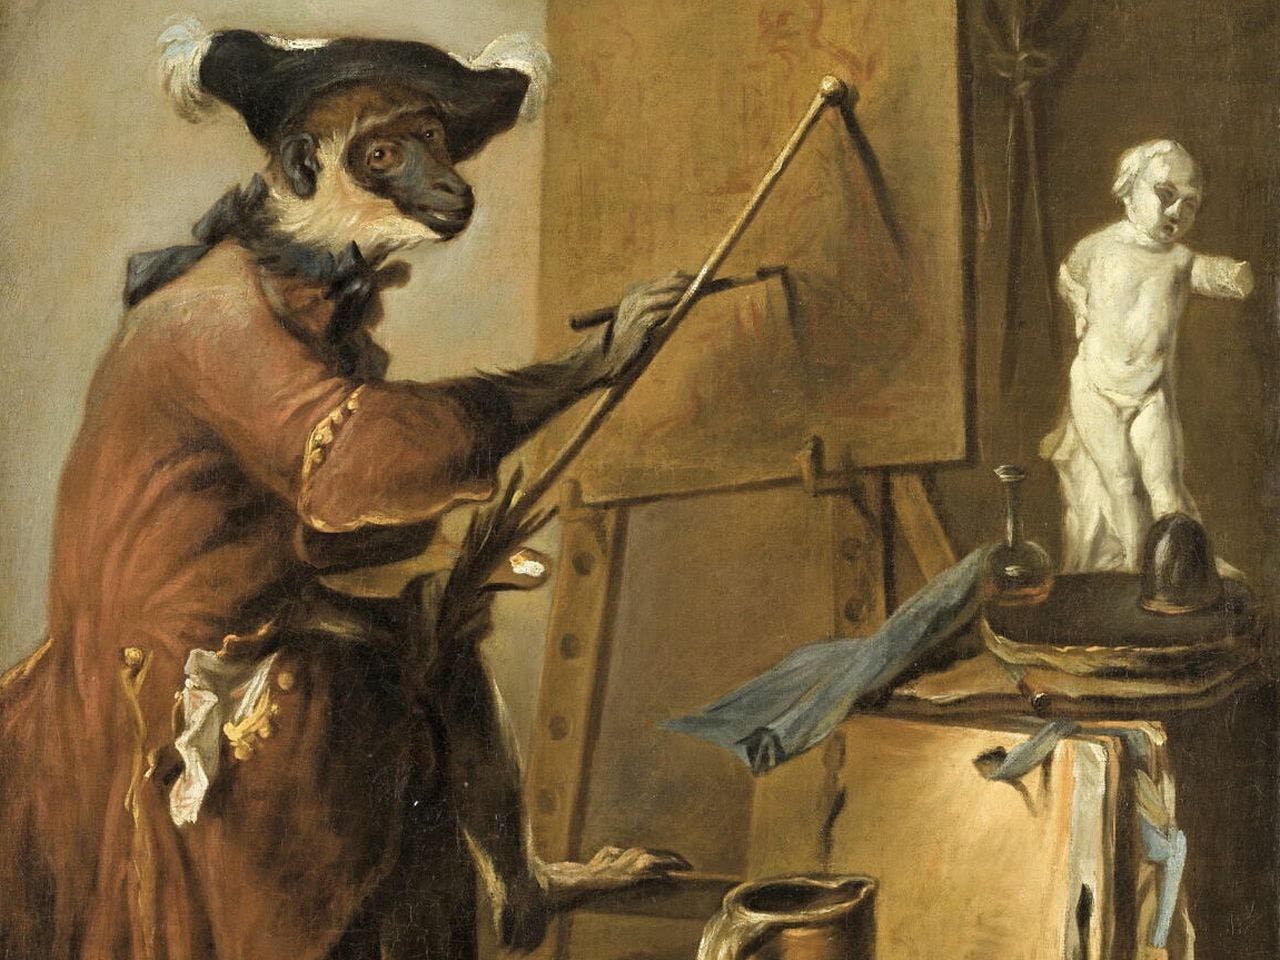 An artwork by Jean-Baptiste Chardin, titled The Monkey Painter, dated 1739-1740. Collection of the Louvre, Paris